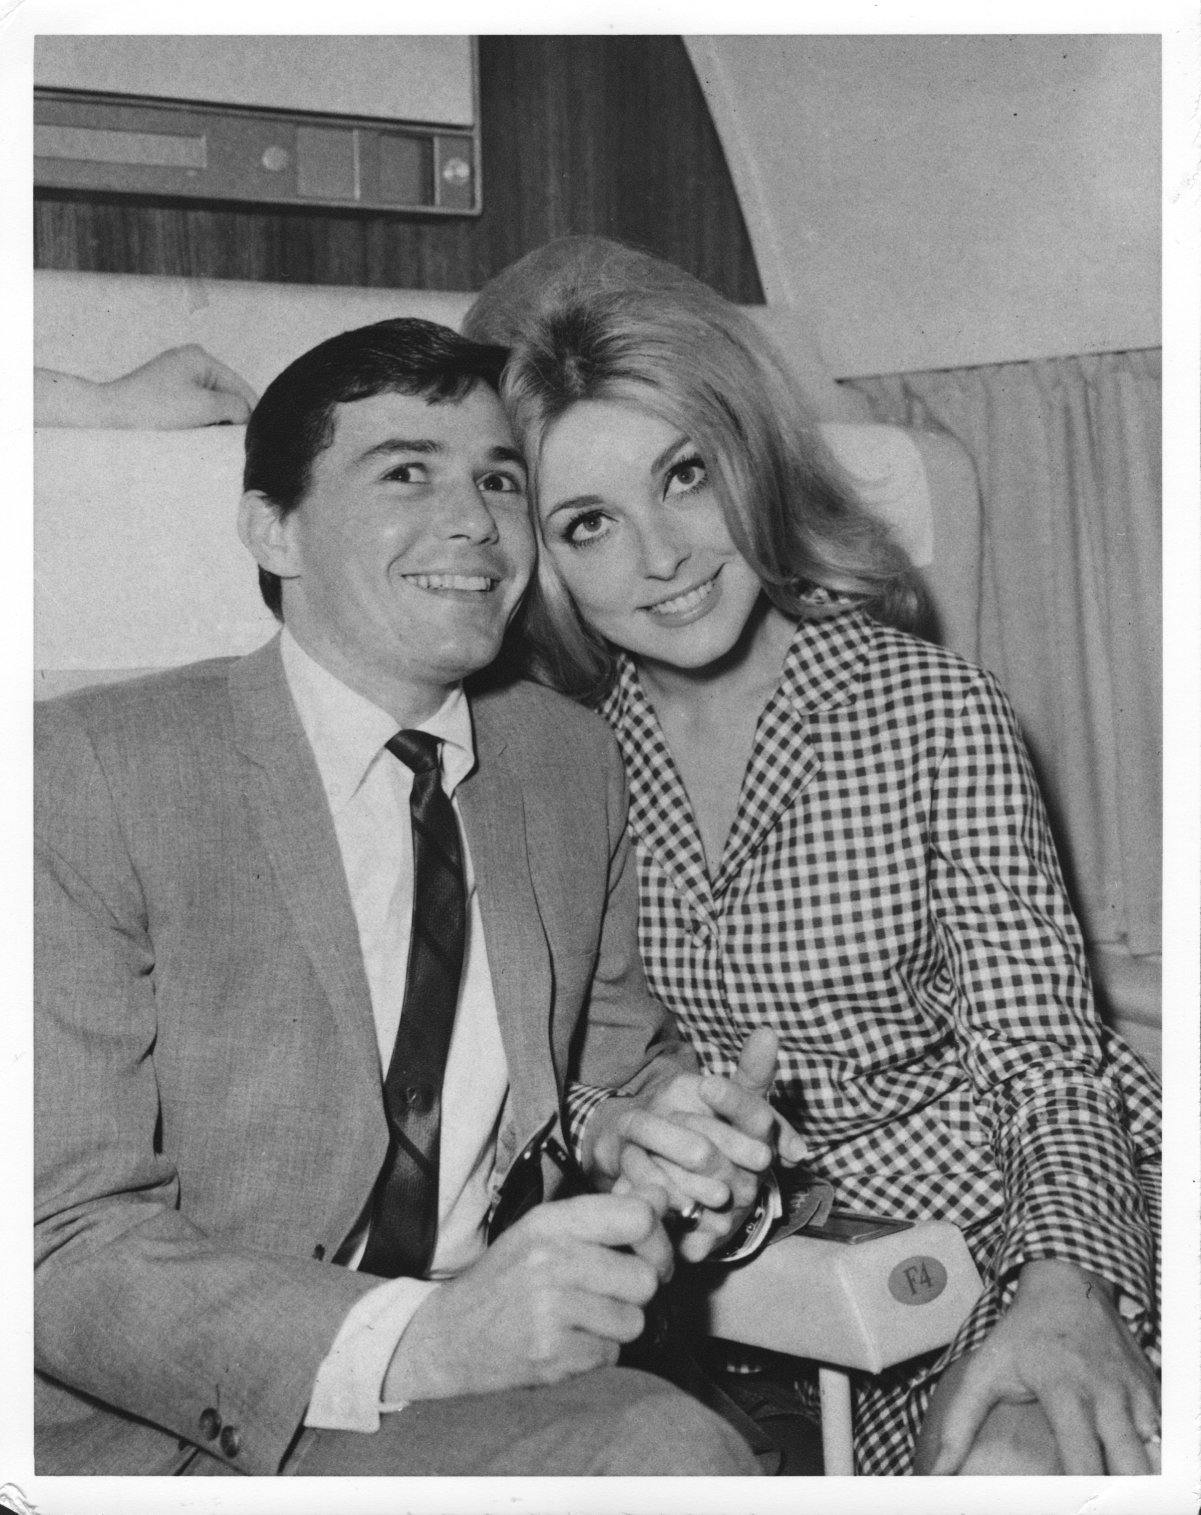 Two of the Manson Family's victims: celebrity hairstylist Jay Sebring and actor Sharon Tate in 1966